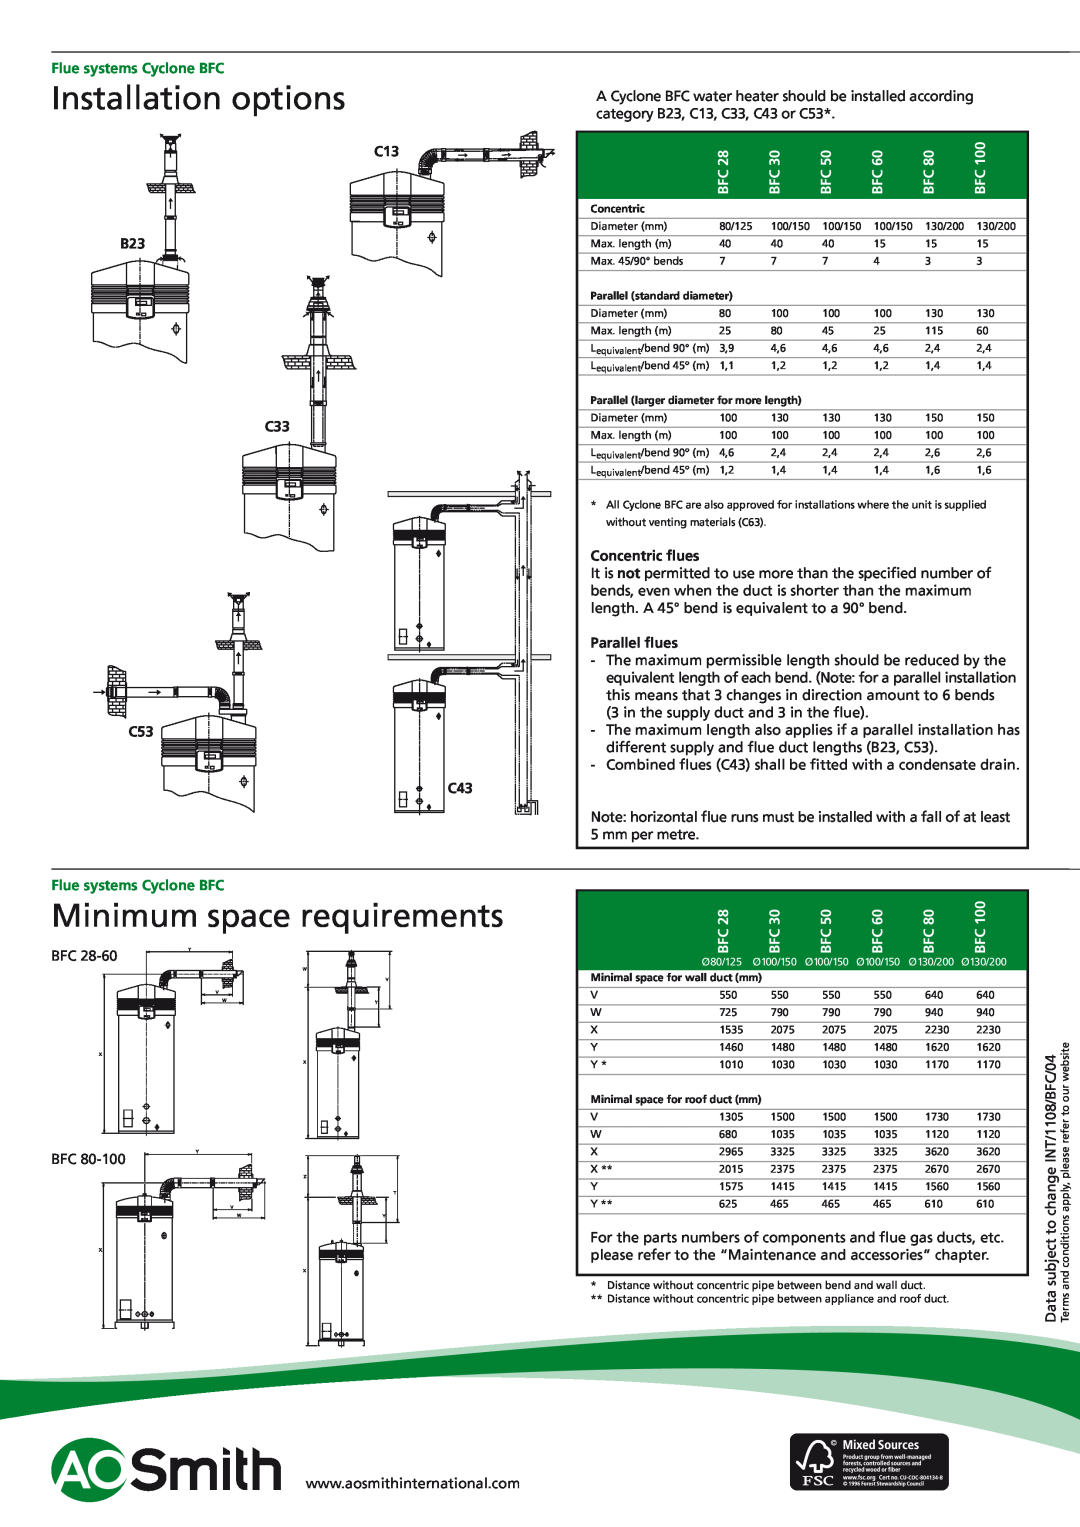 A.O. Smith BFC - 50 manual Installation options, Minimum space requirements, Flue systems Cyclone BFC, C13 B23 C33 C53 C43 